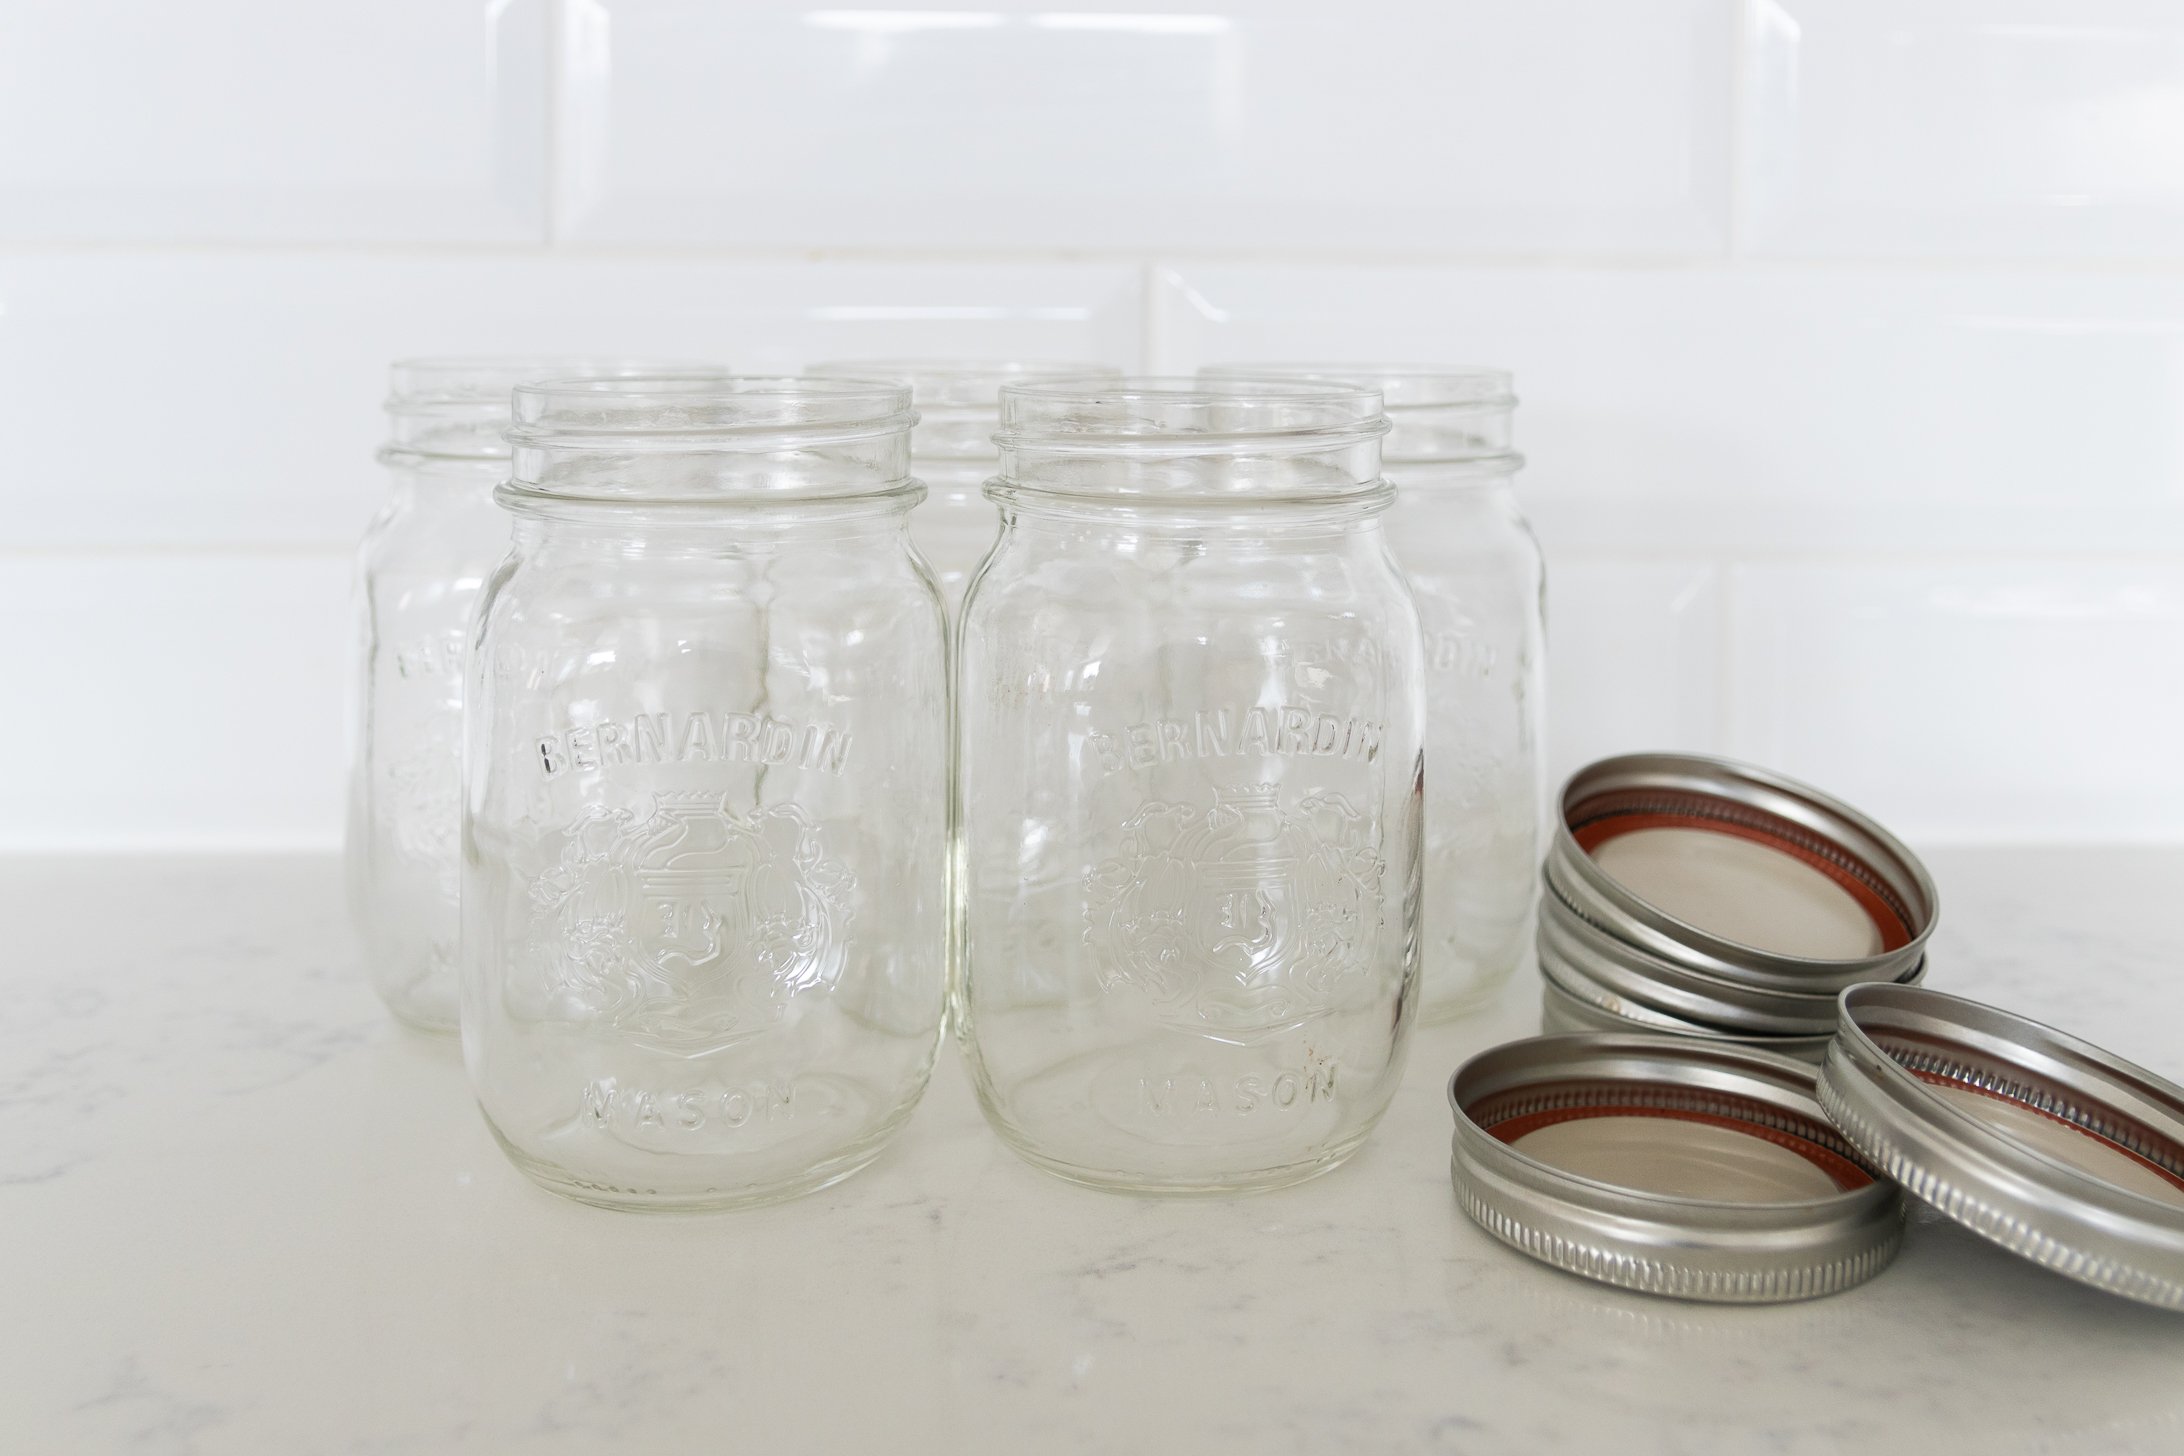 Five empty mason jars and lids leaning against a white background.